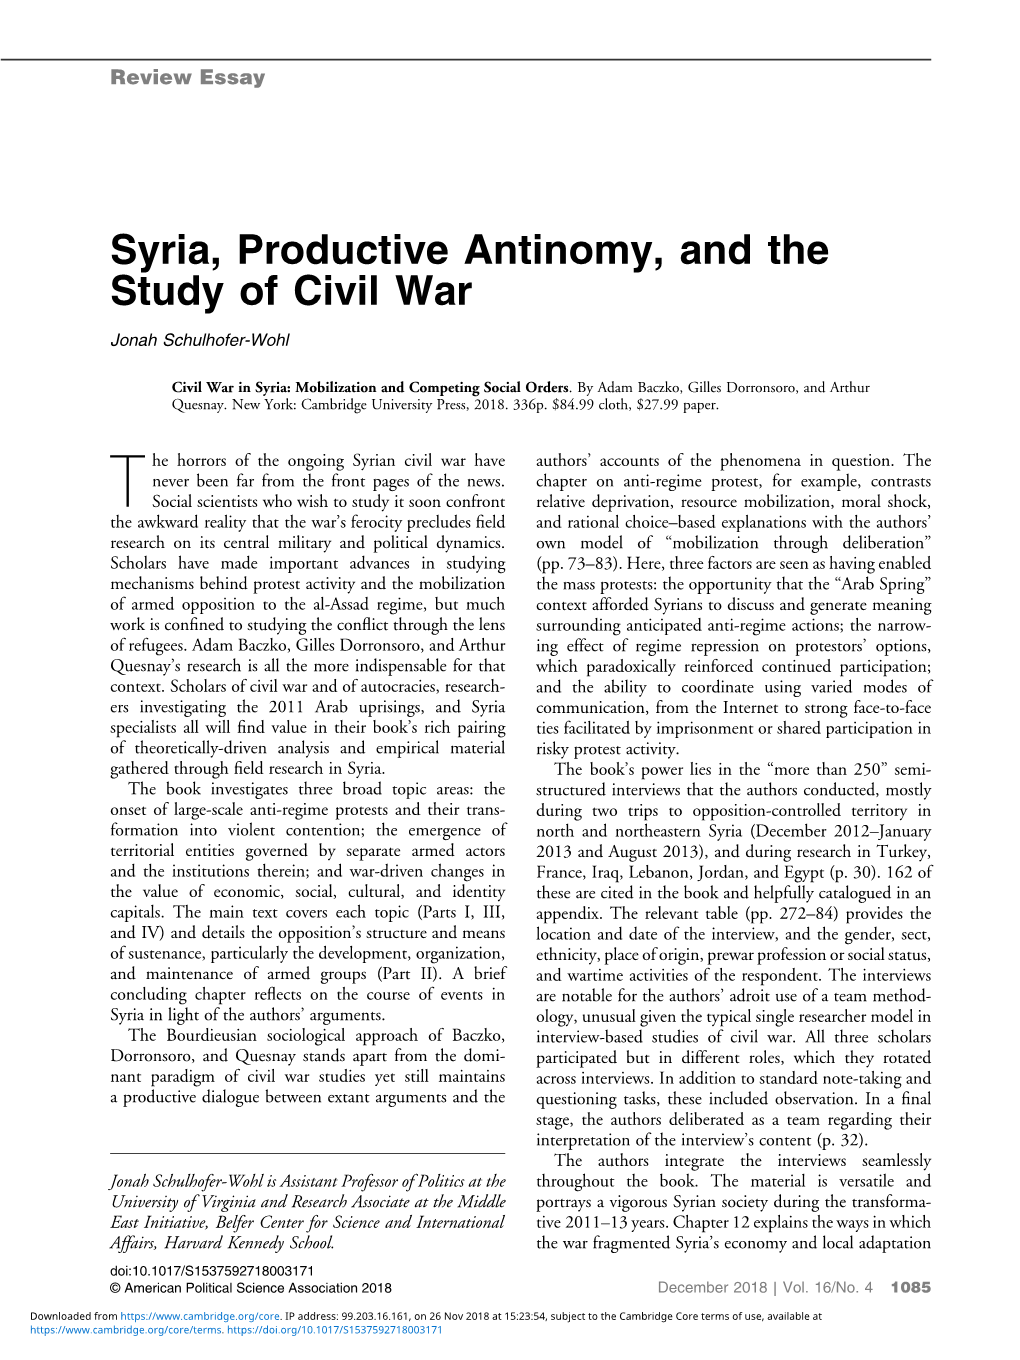 Syria, Productive Antinomy, and the Study of Civil War